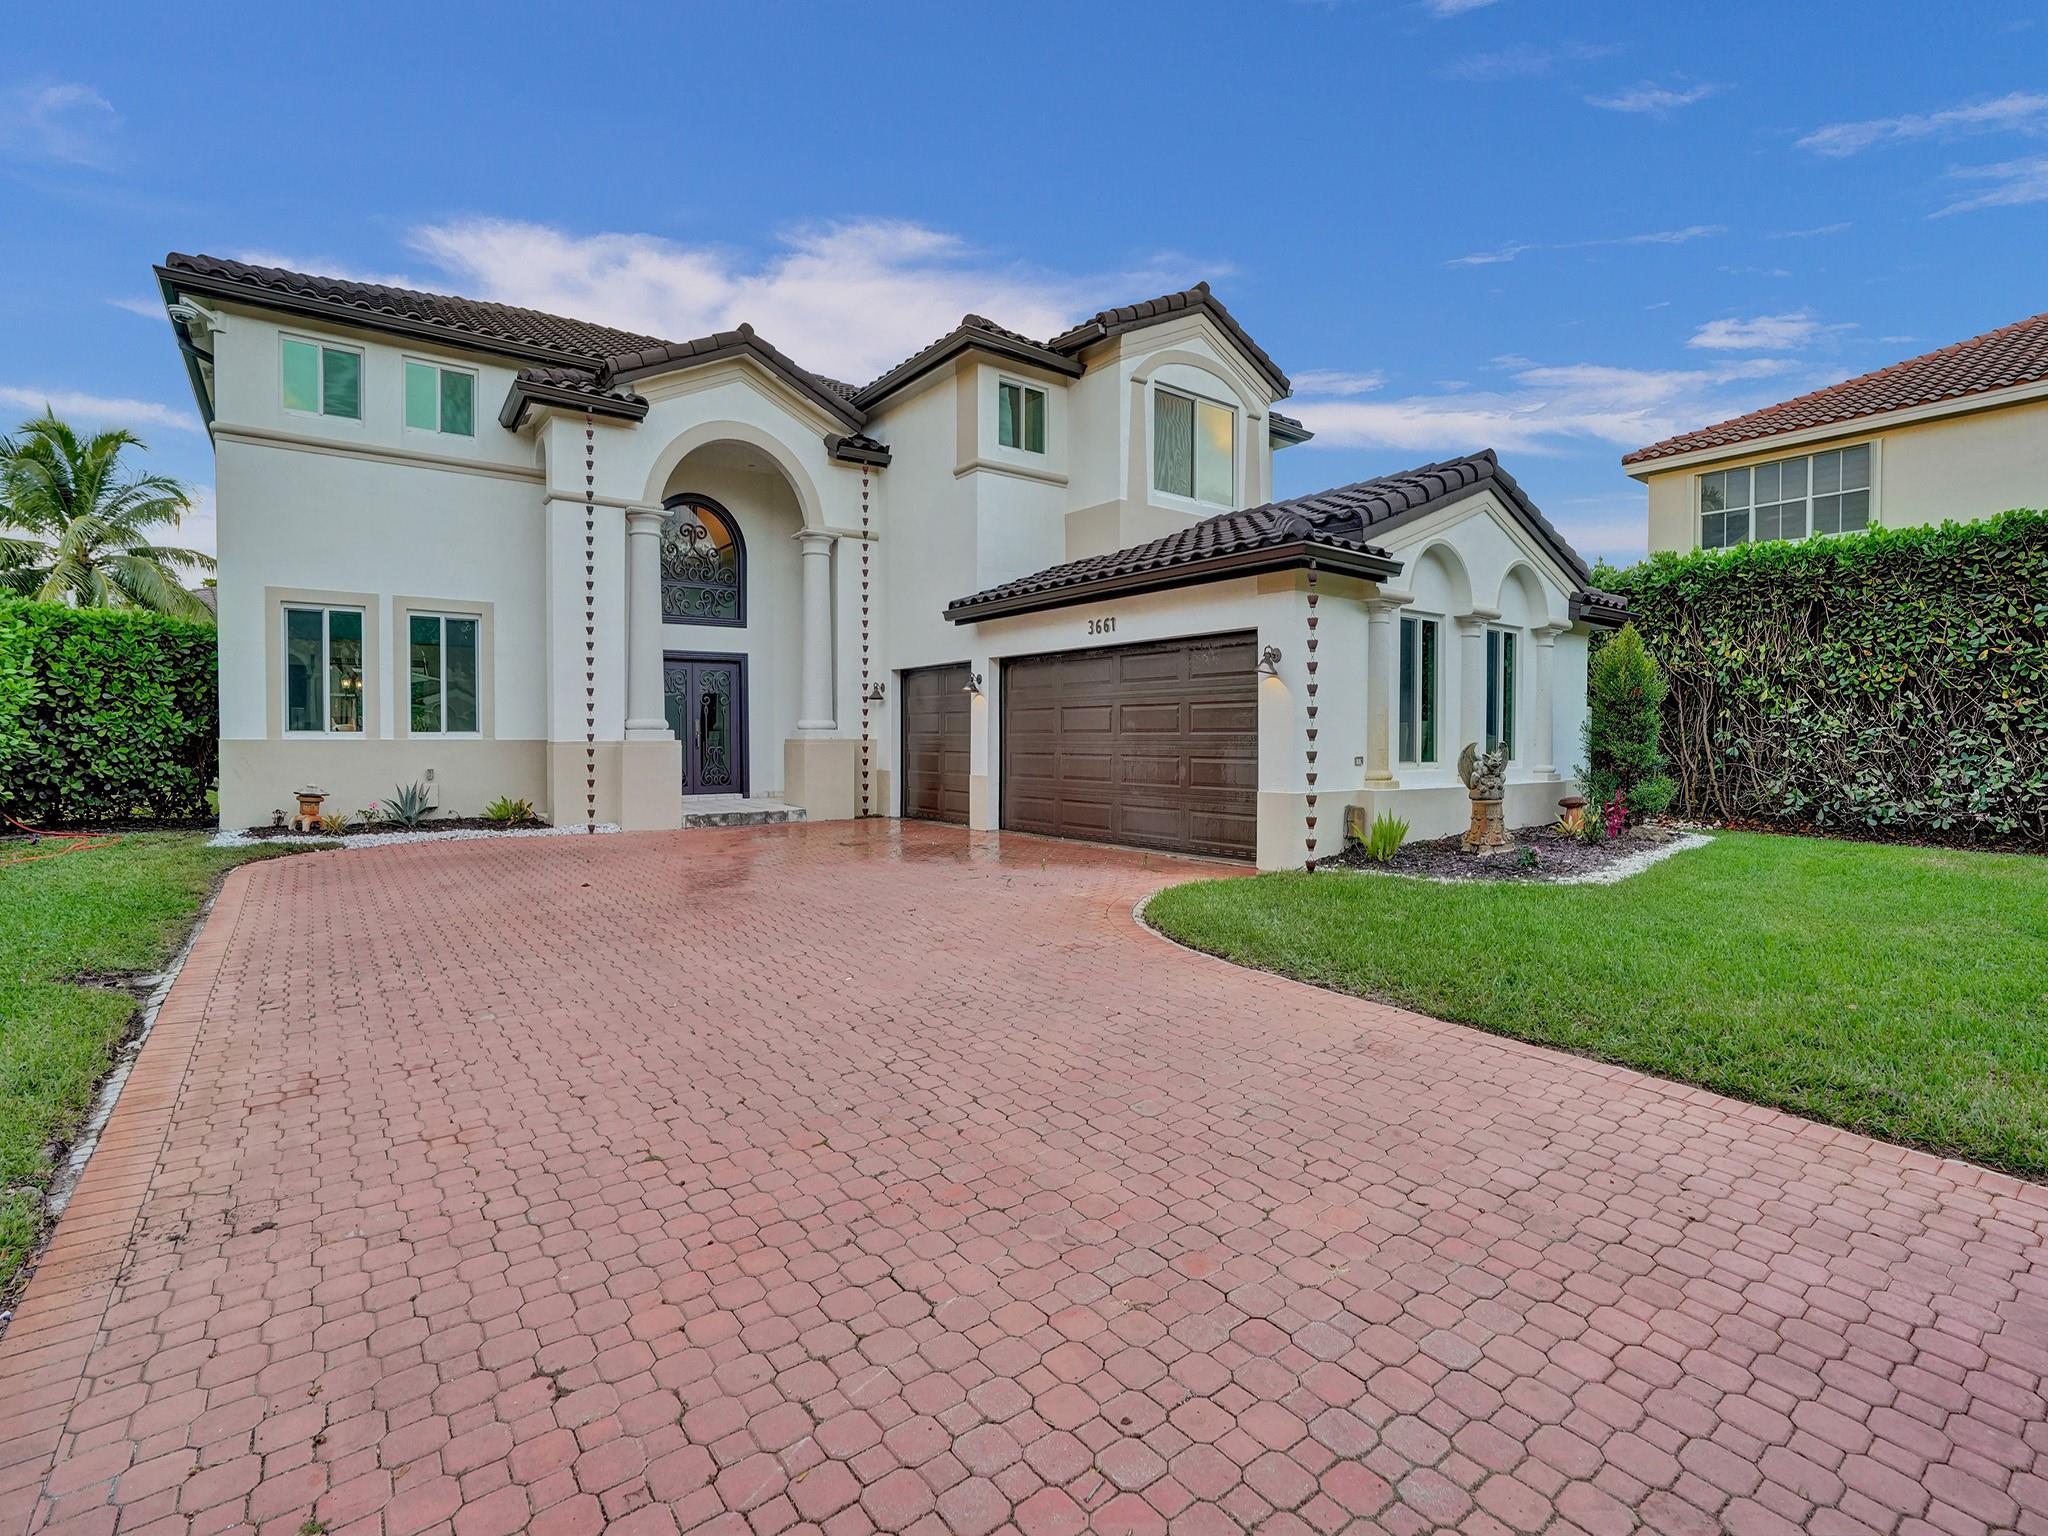 Property featured in Single Family Homes-Gated Comm. in Miramar Fl #1